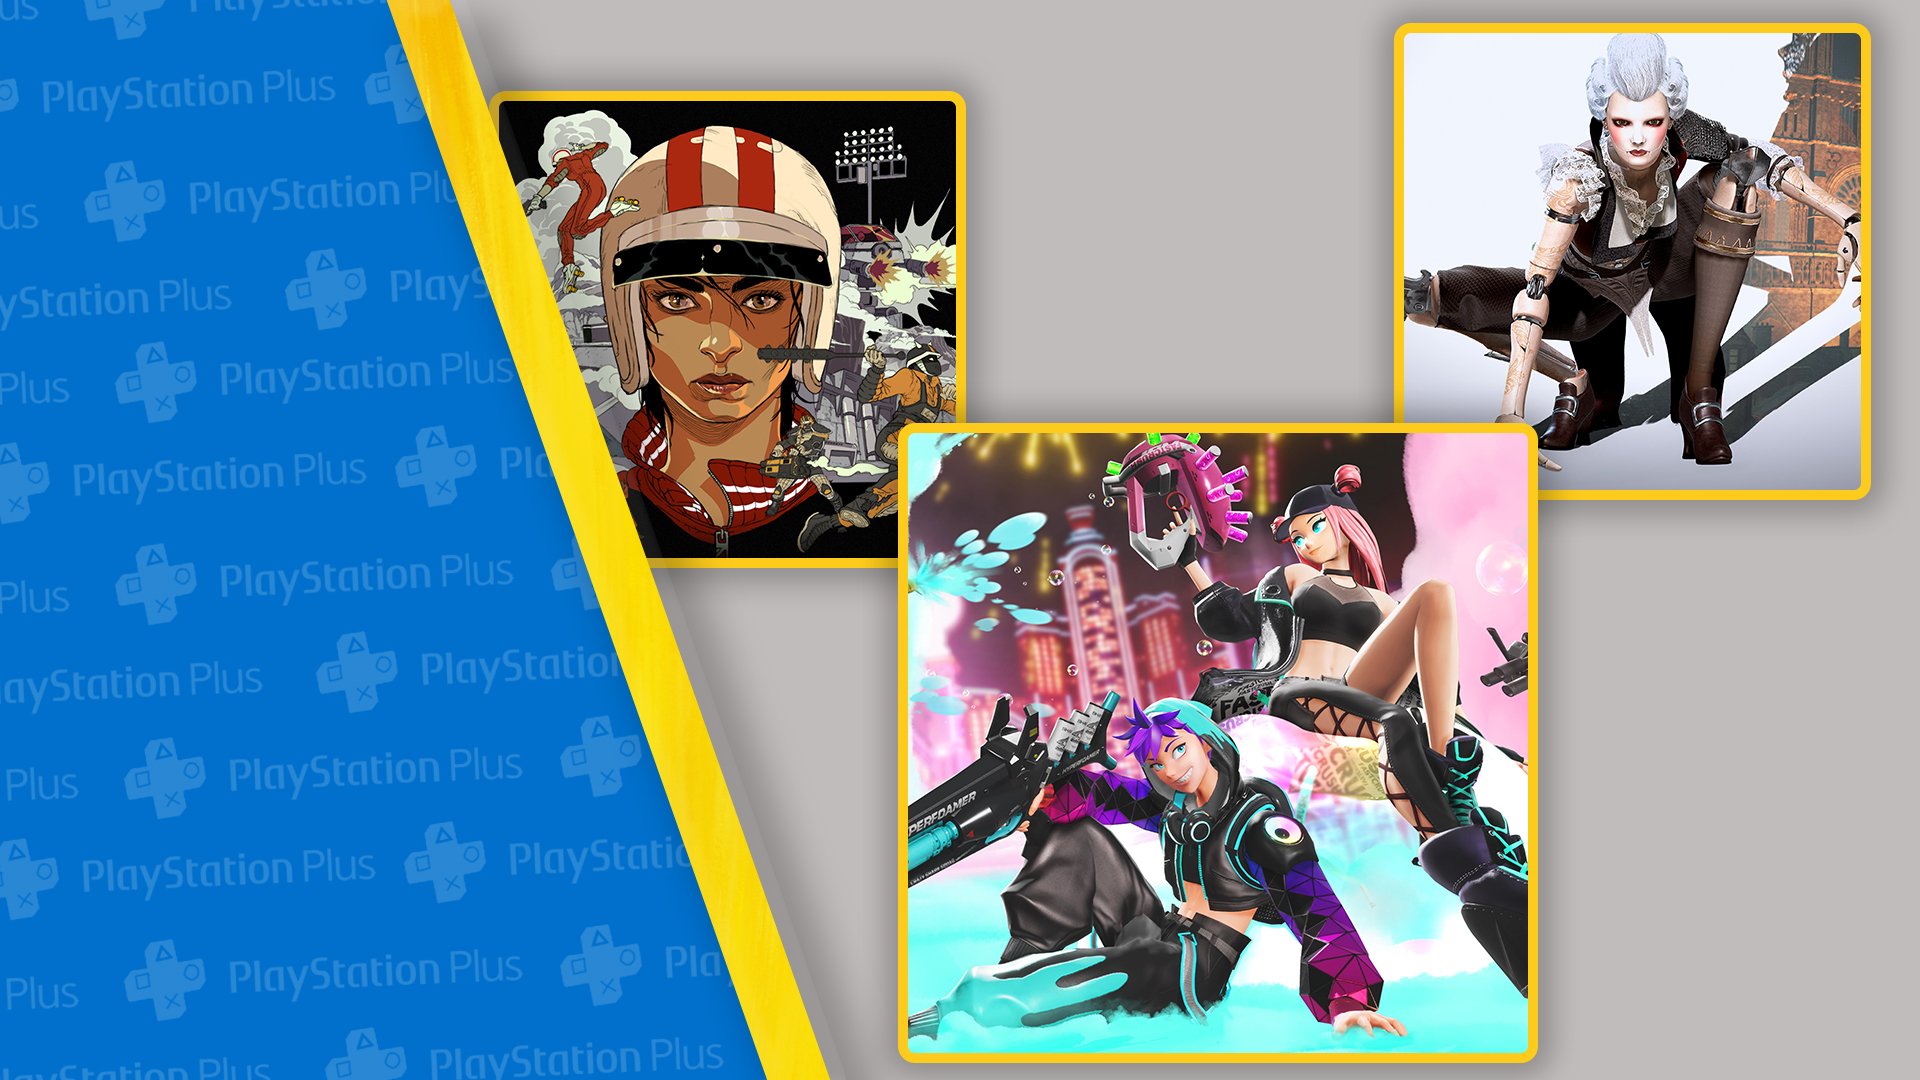 PlayStation Plus Monthly Games for February: Foamstars, Rollerdrome,  Steelrising – PlayStation.Blog